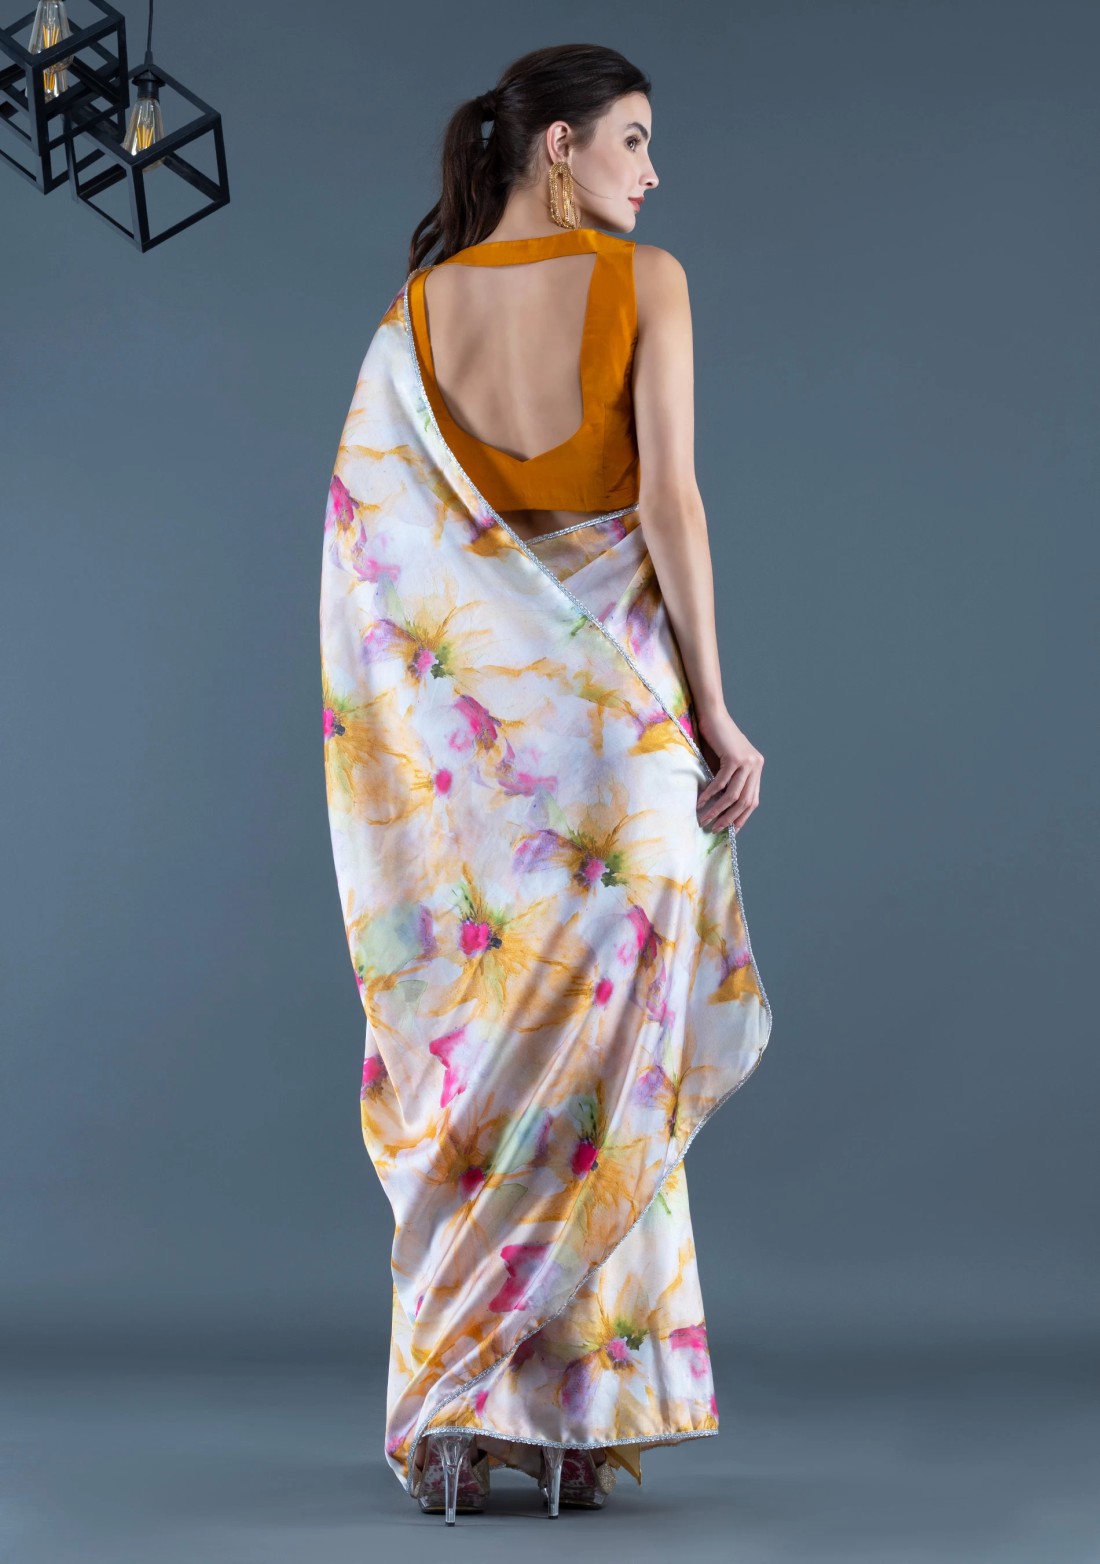 Mustard & Pink Marble Floral Printed Modal Satin Ready-to-Wear Saree